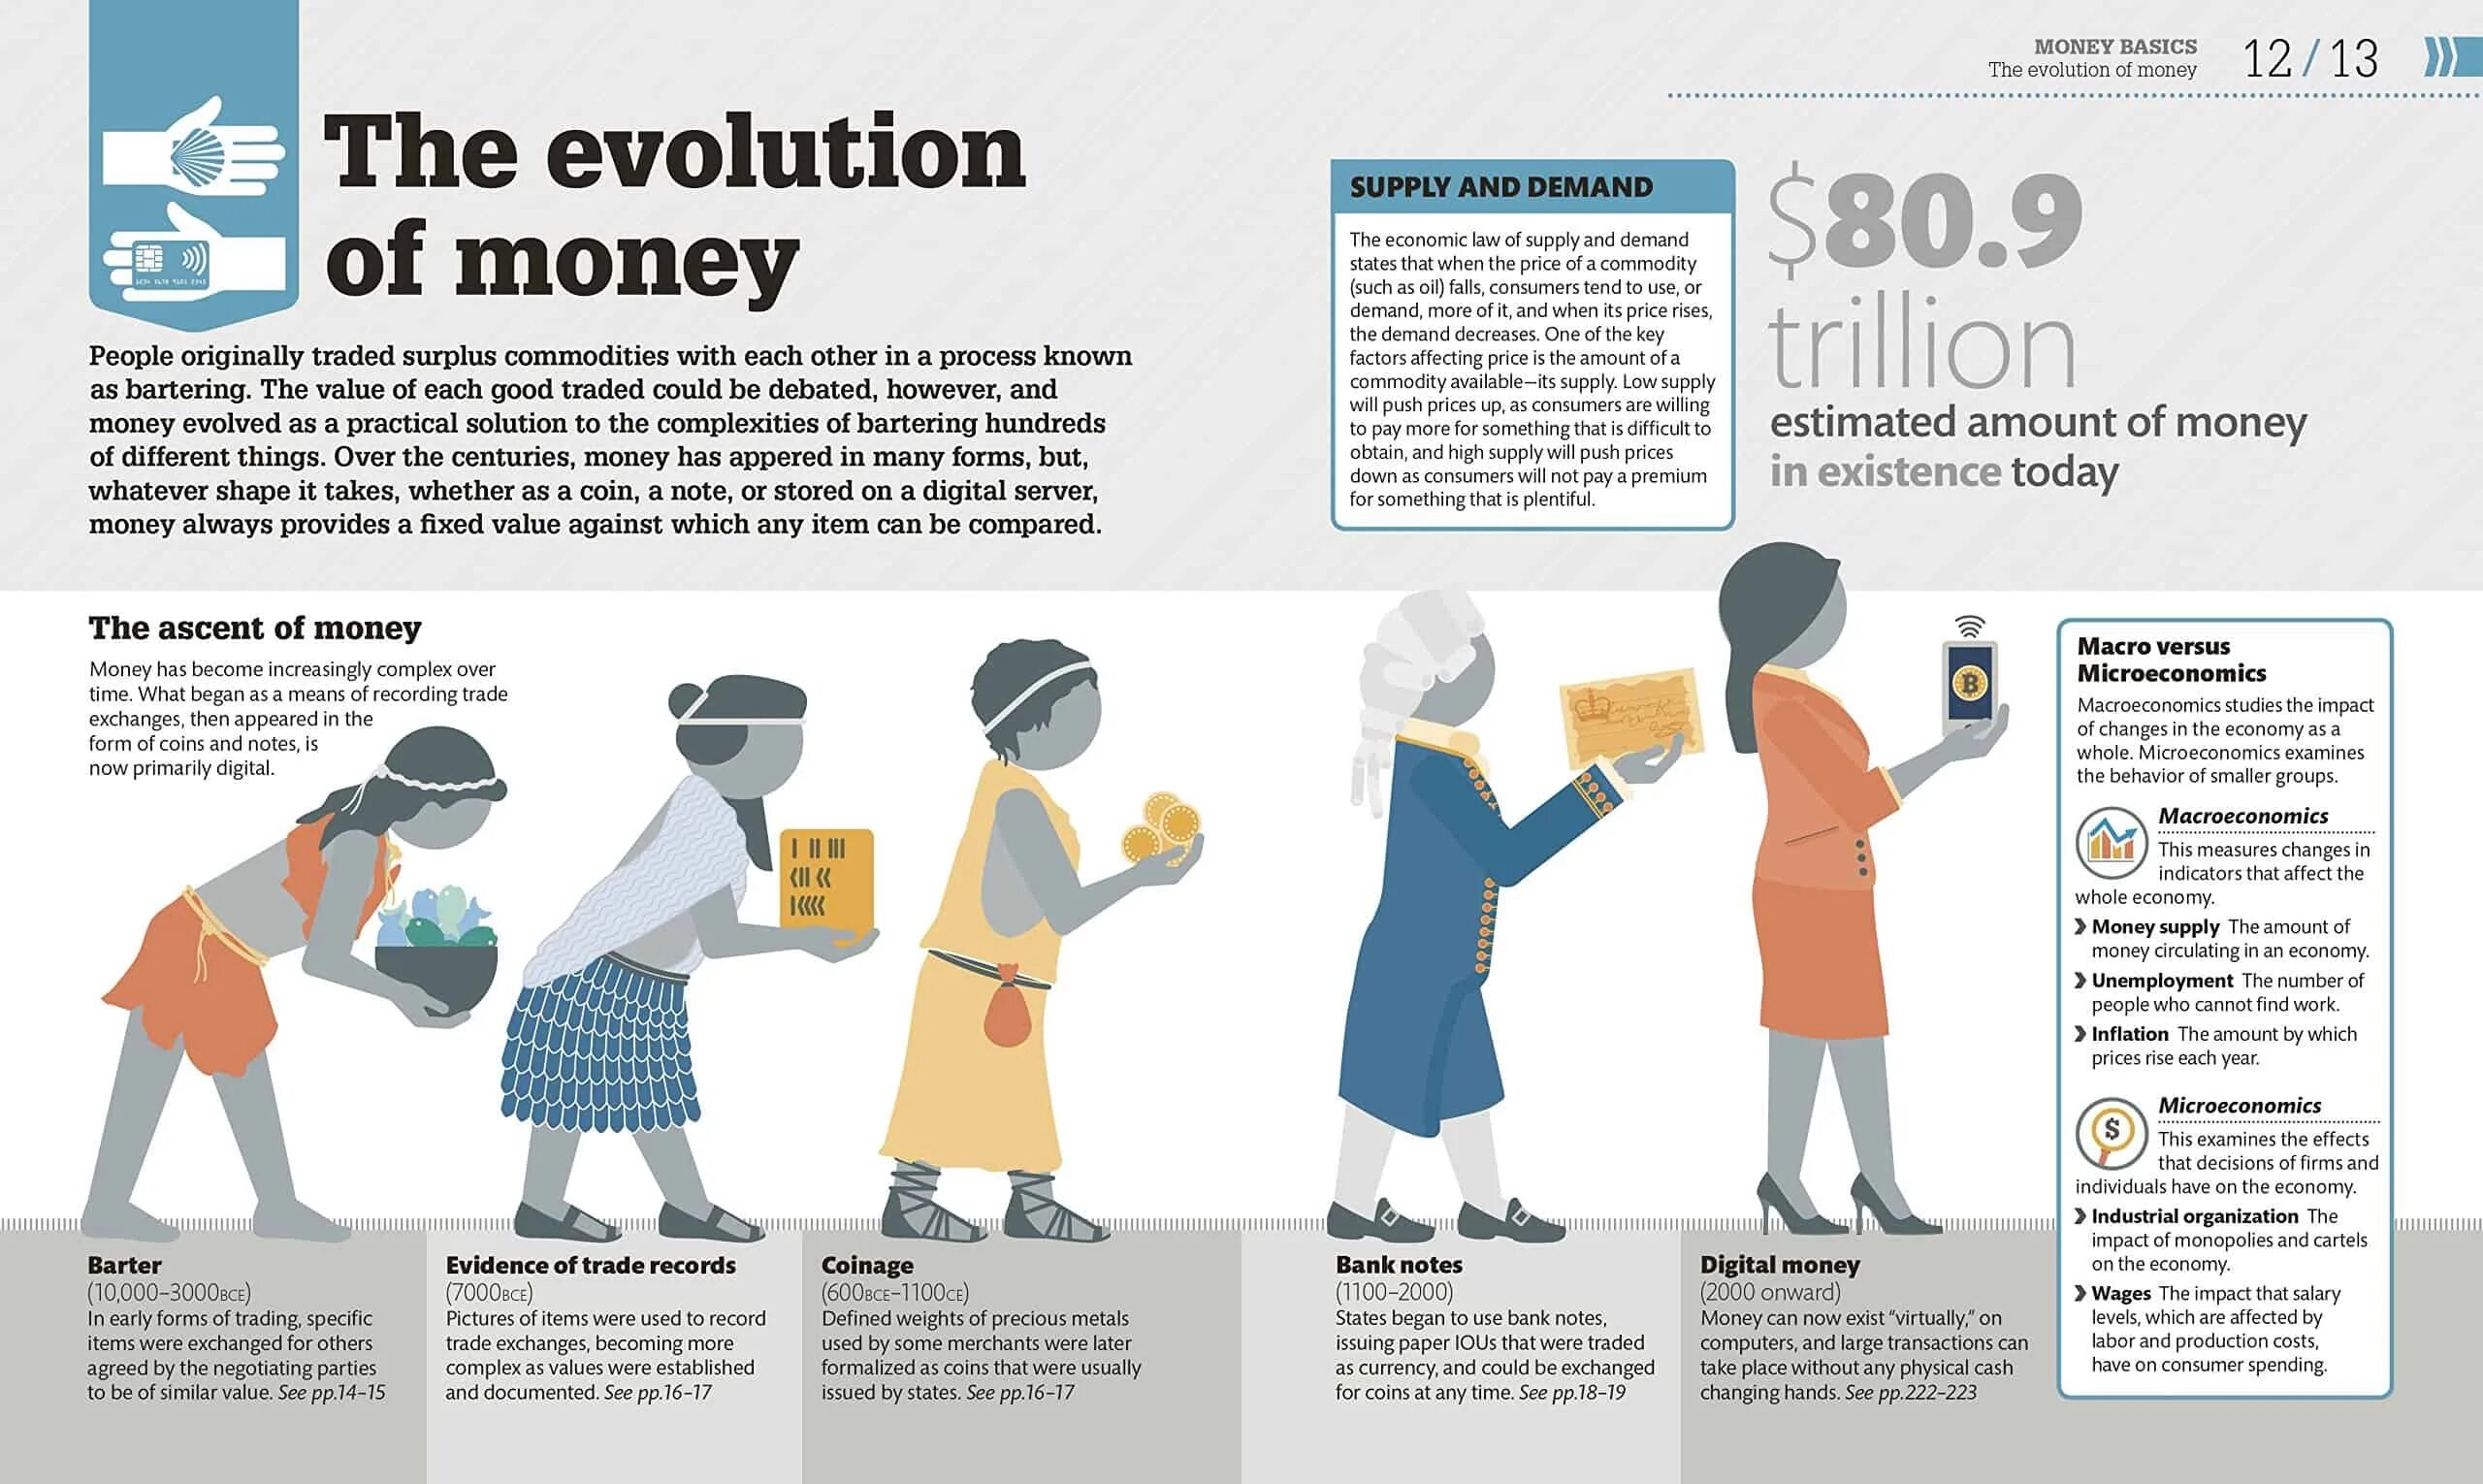 Do the most of something. Evolution of money. History of money. Early form of money. The economy and money презентация.